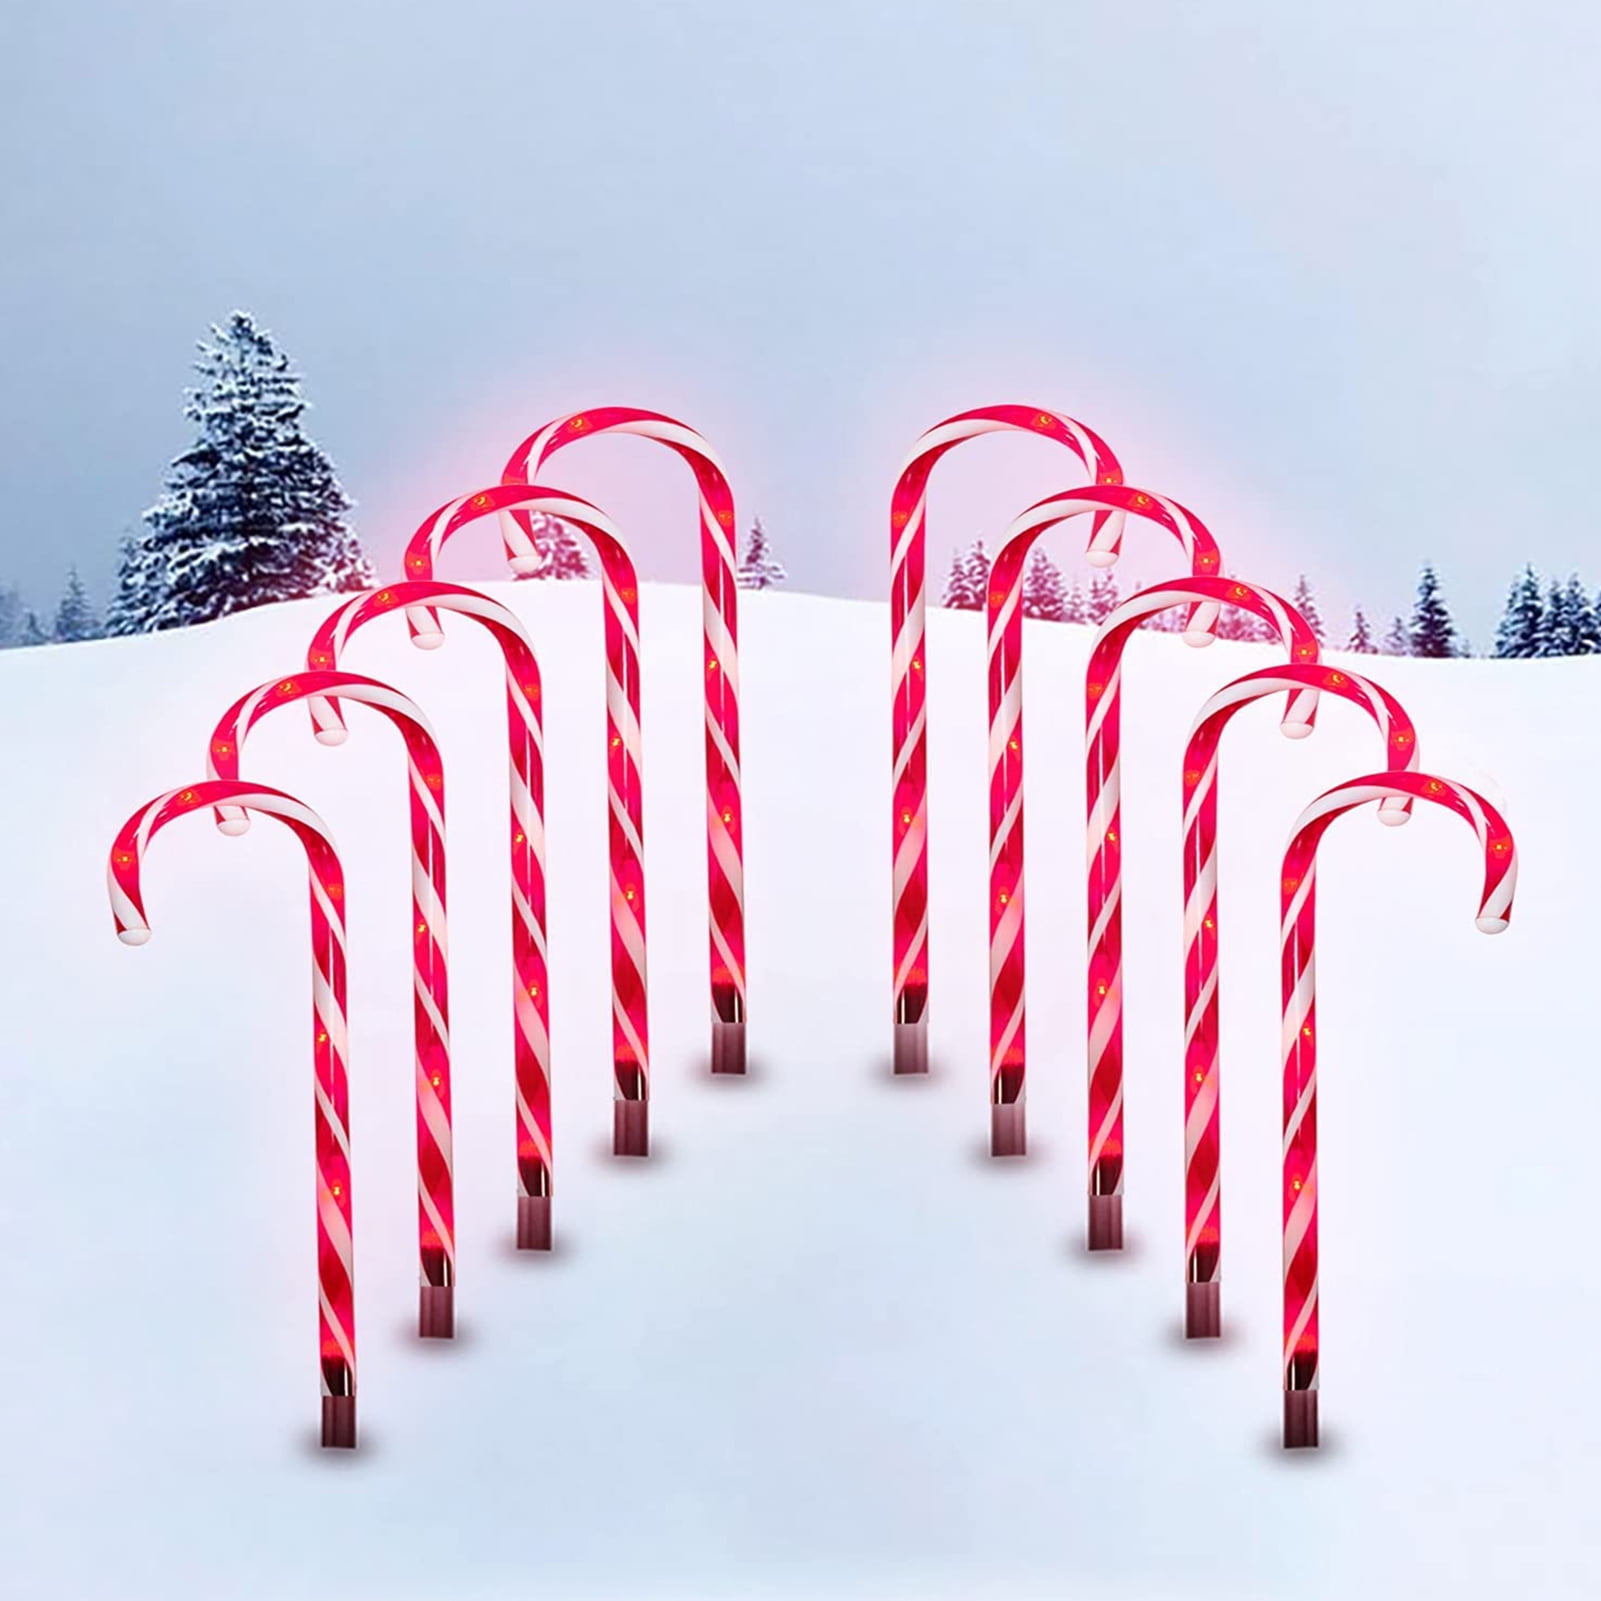 Details about   10/100pcs Acrylic Candy Cane Canes Christmas Tree Decoration Ornaments Xmas Gift 